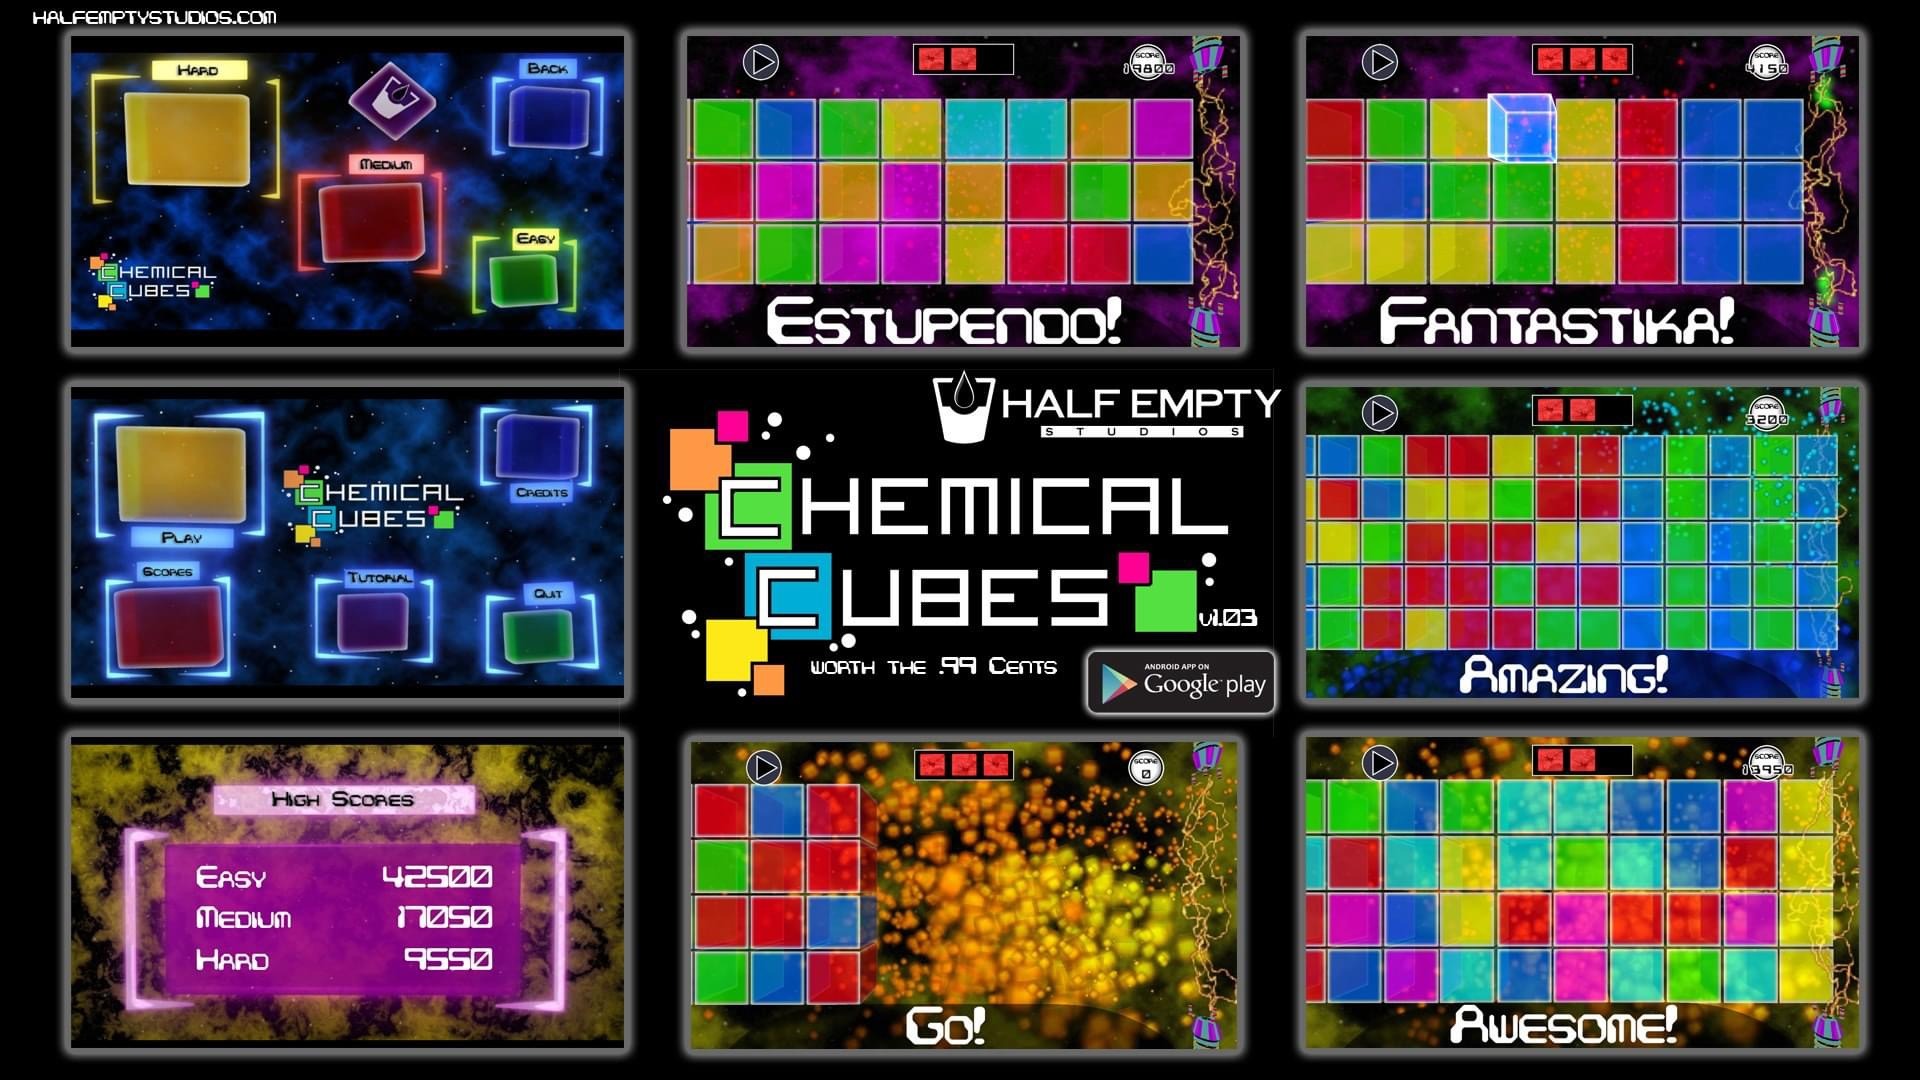 early beta screenshots of 'Chemical Cubes'.